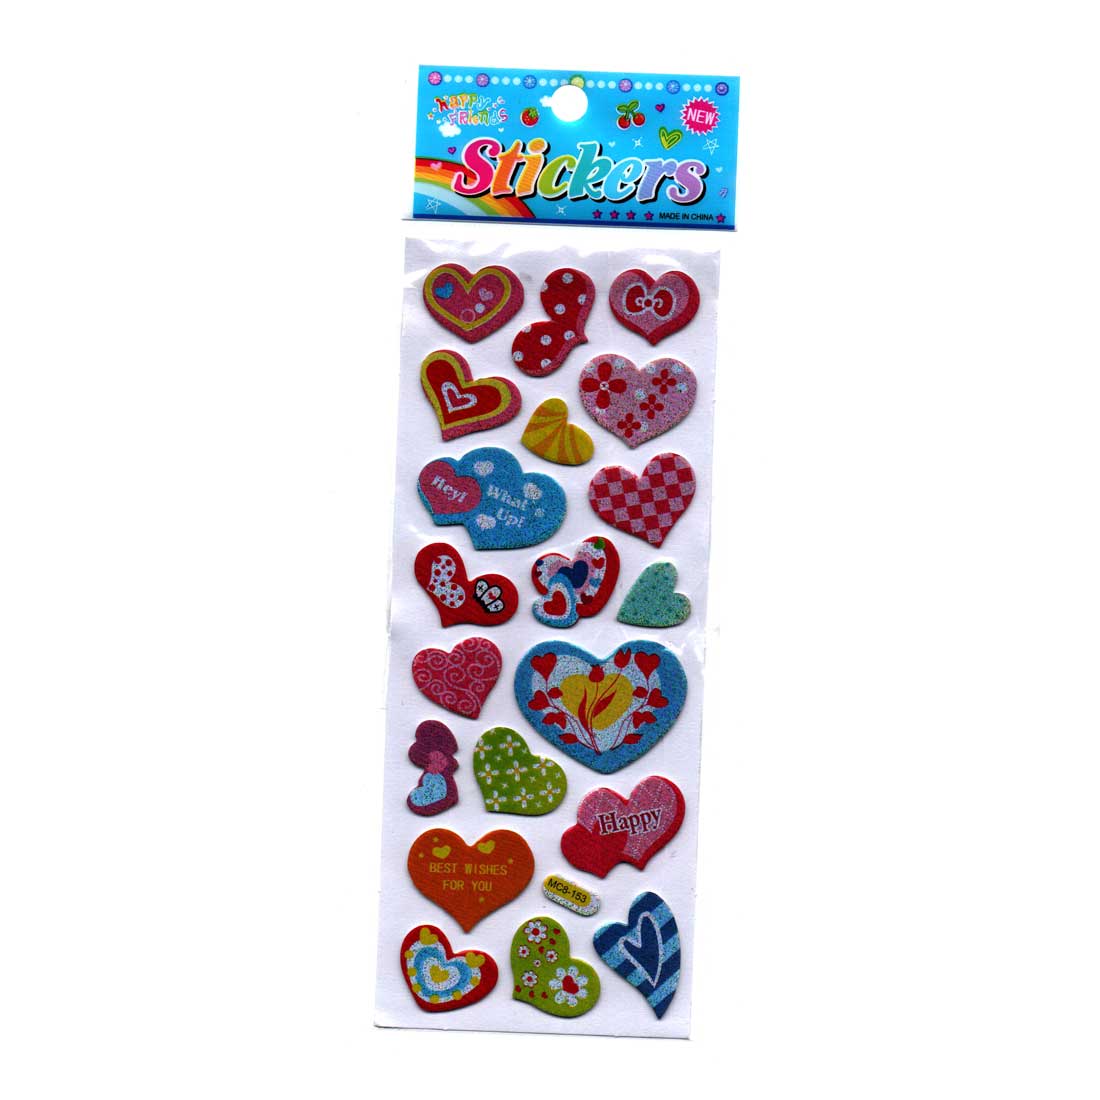 I Heart You Kids Sticker Pack by Pipsticks | Fun & Whimsical Heart Themed  Sticker Designs for Kids | Large Pack with 15 Sheets of Stickers